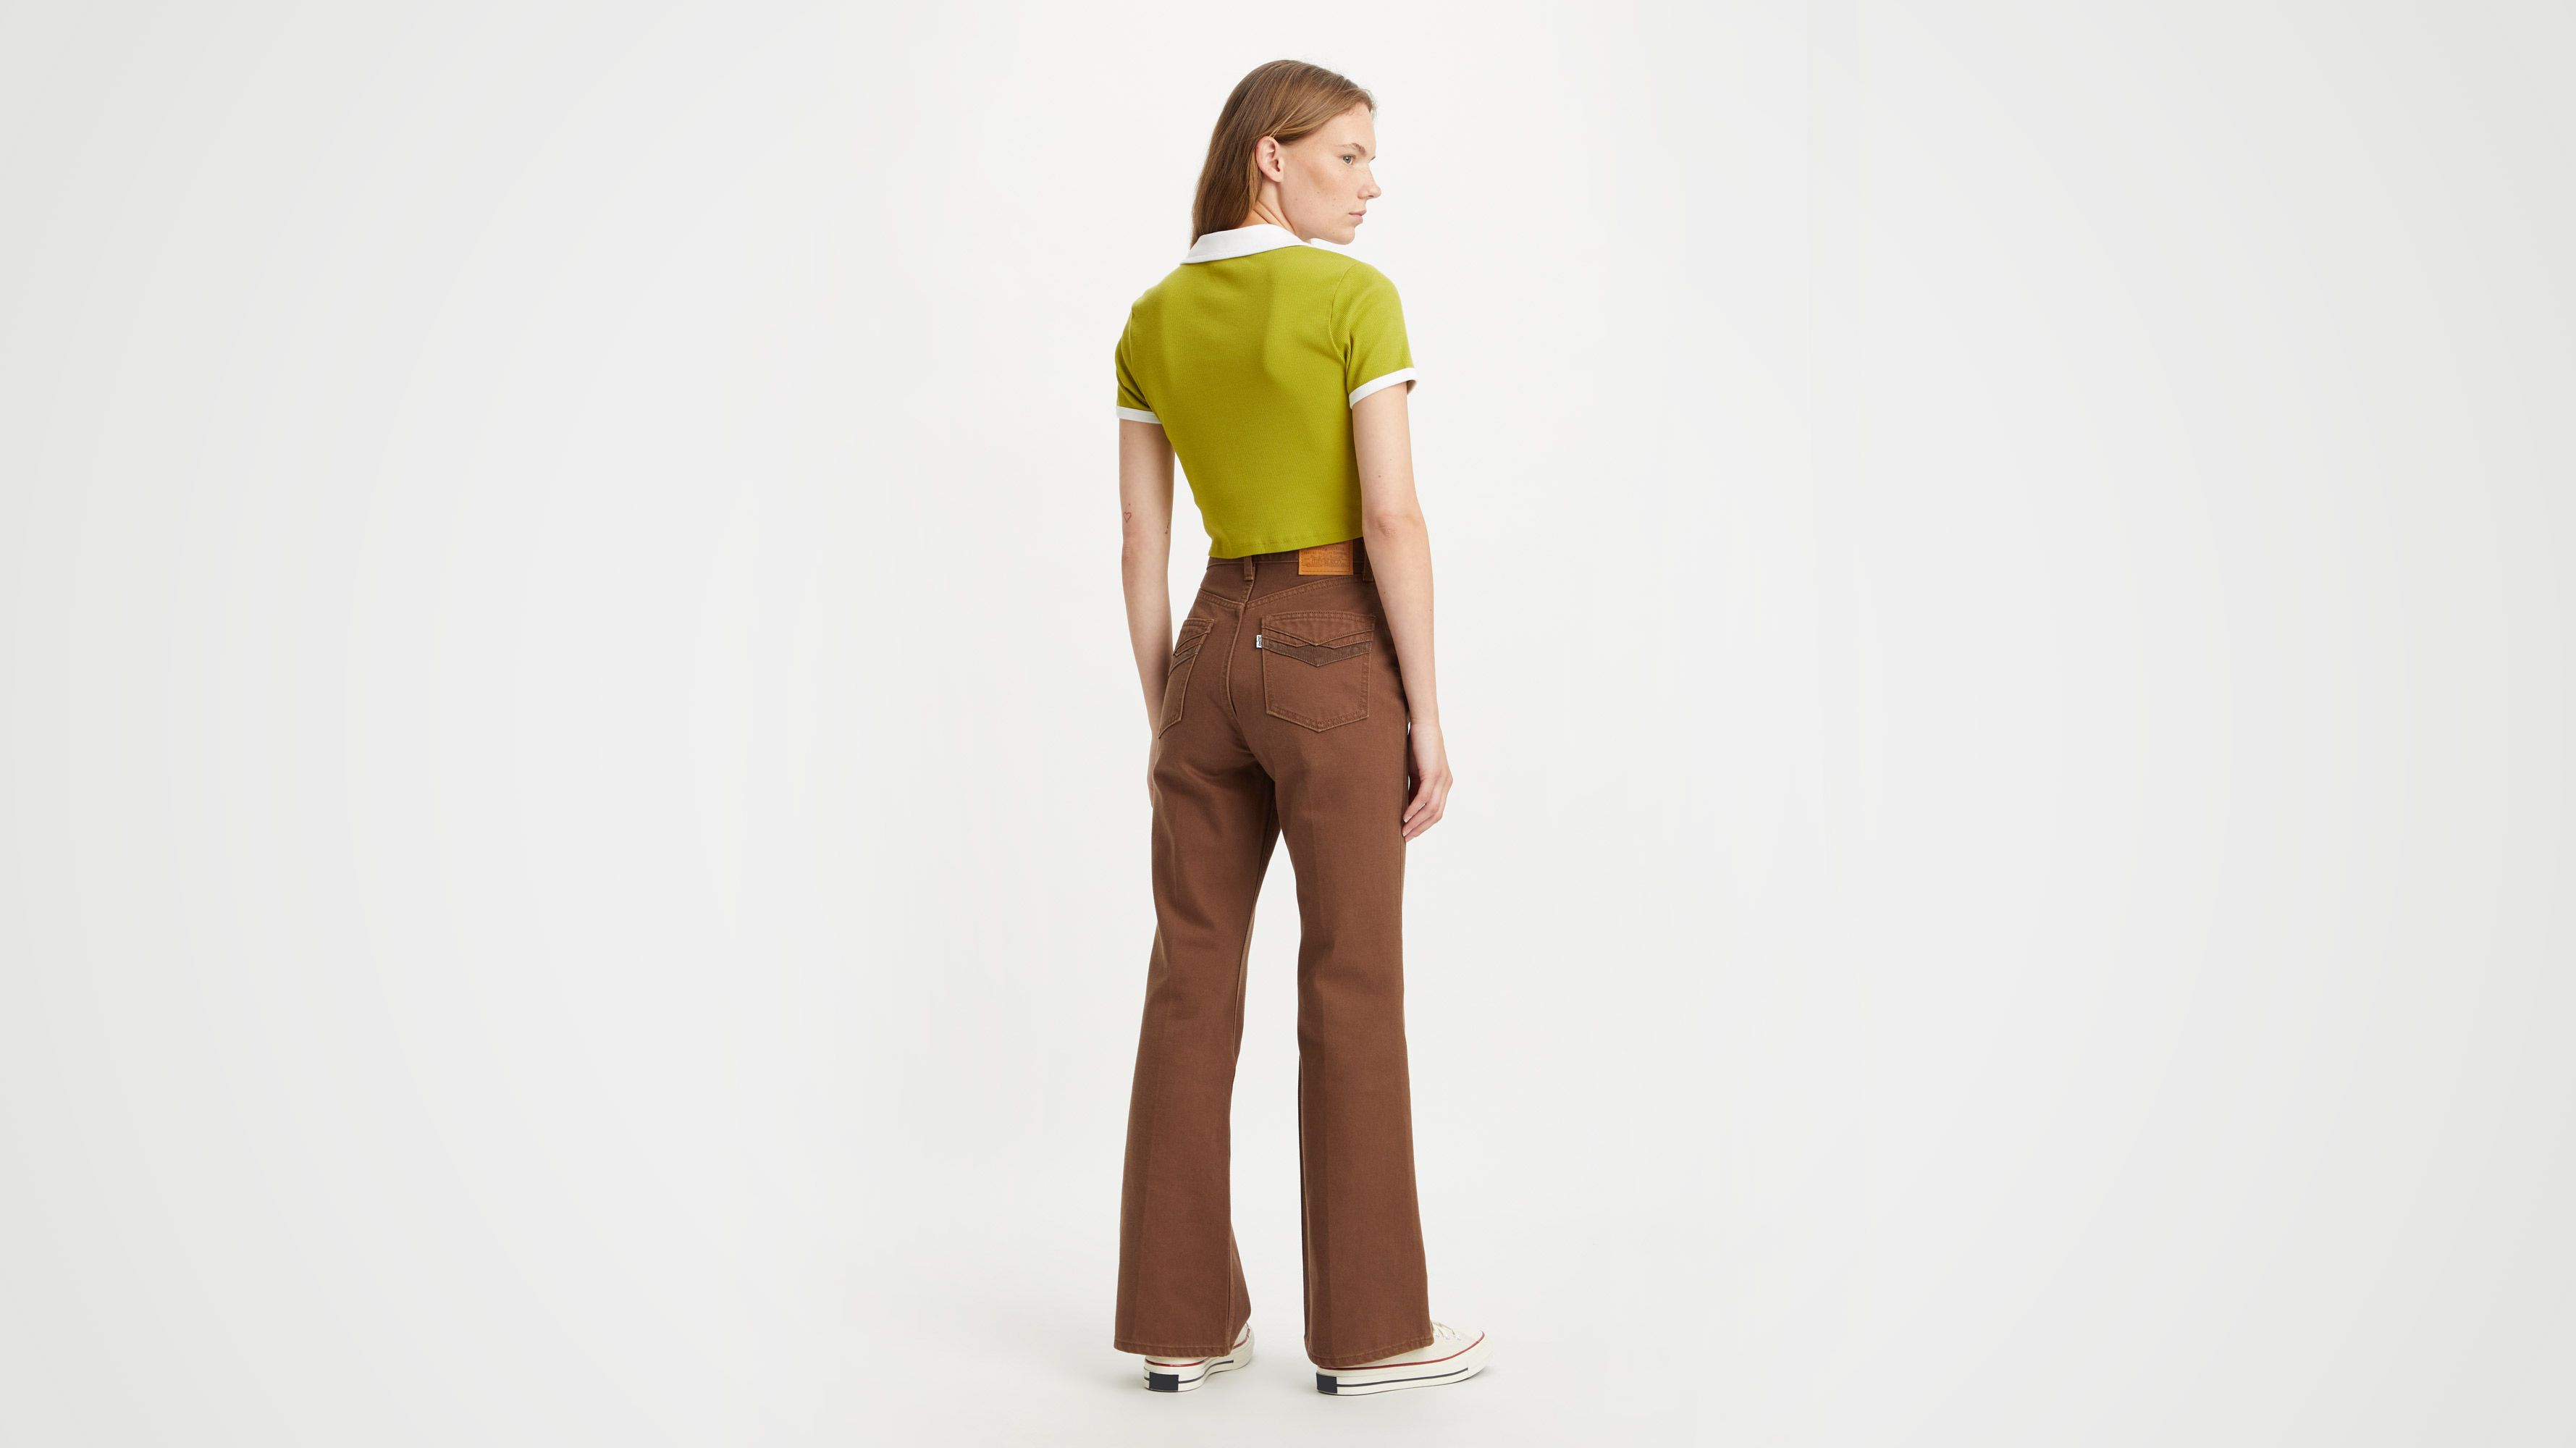 70's Movin' On High Rise Flare Jeans - Brown